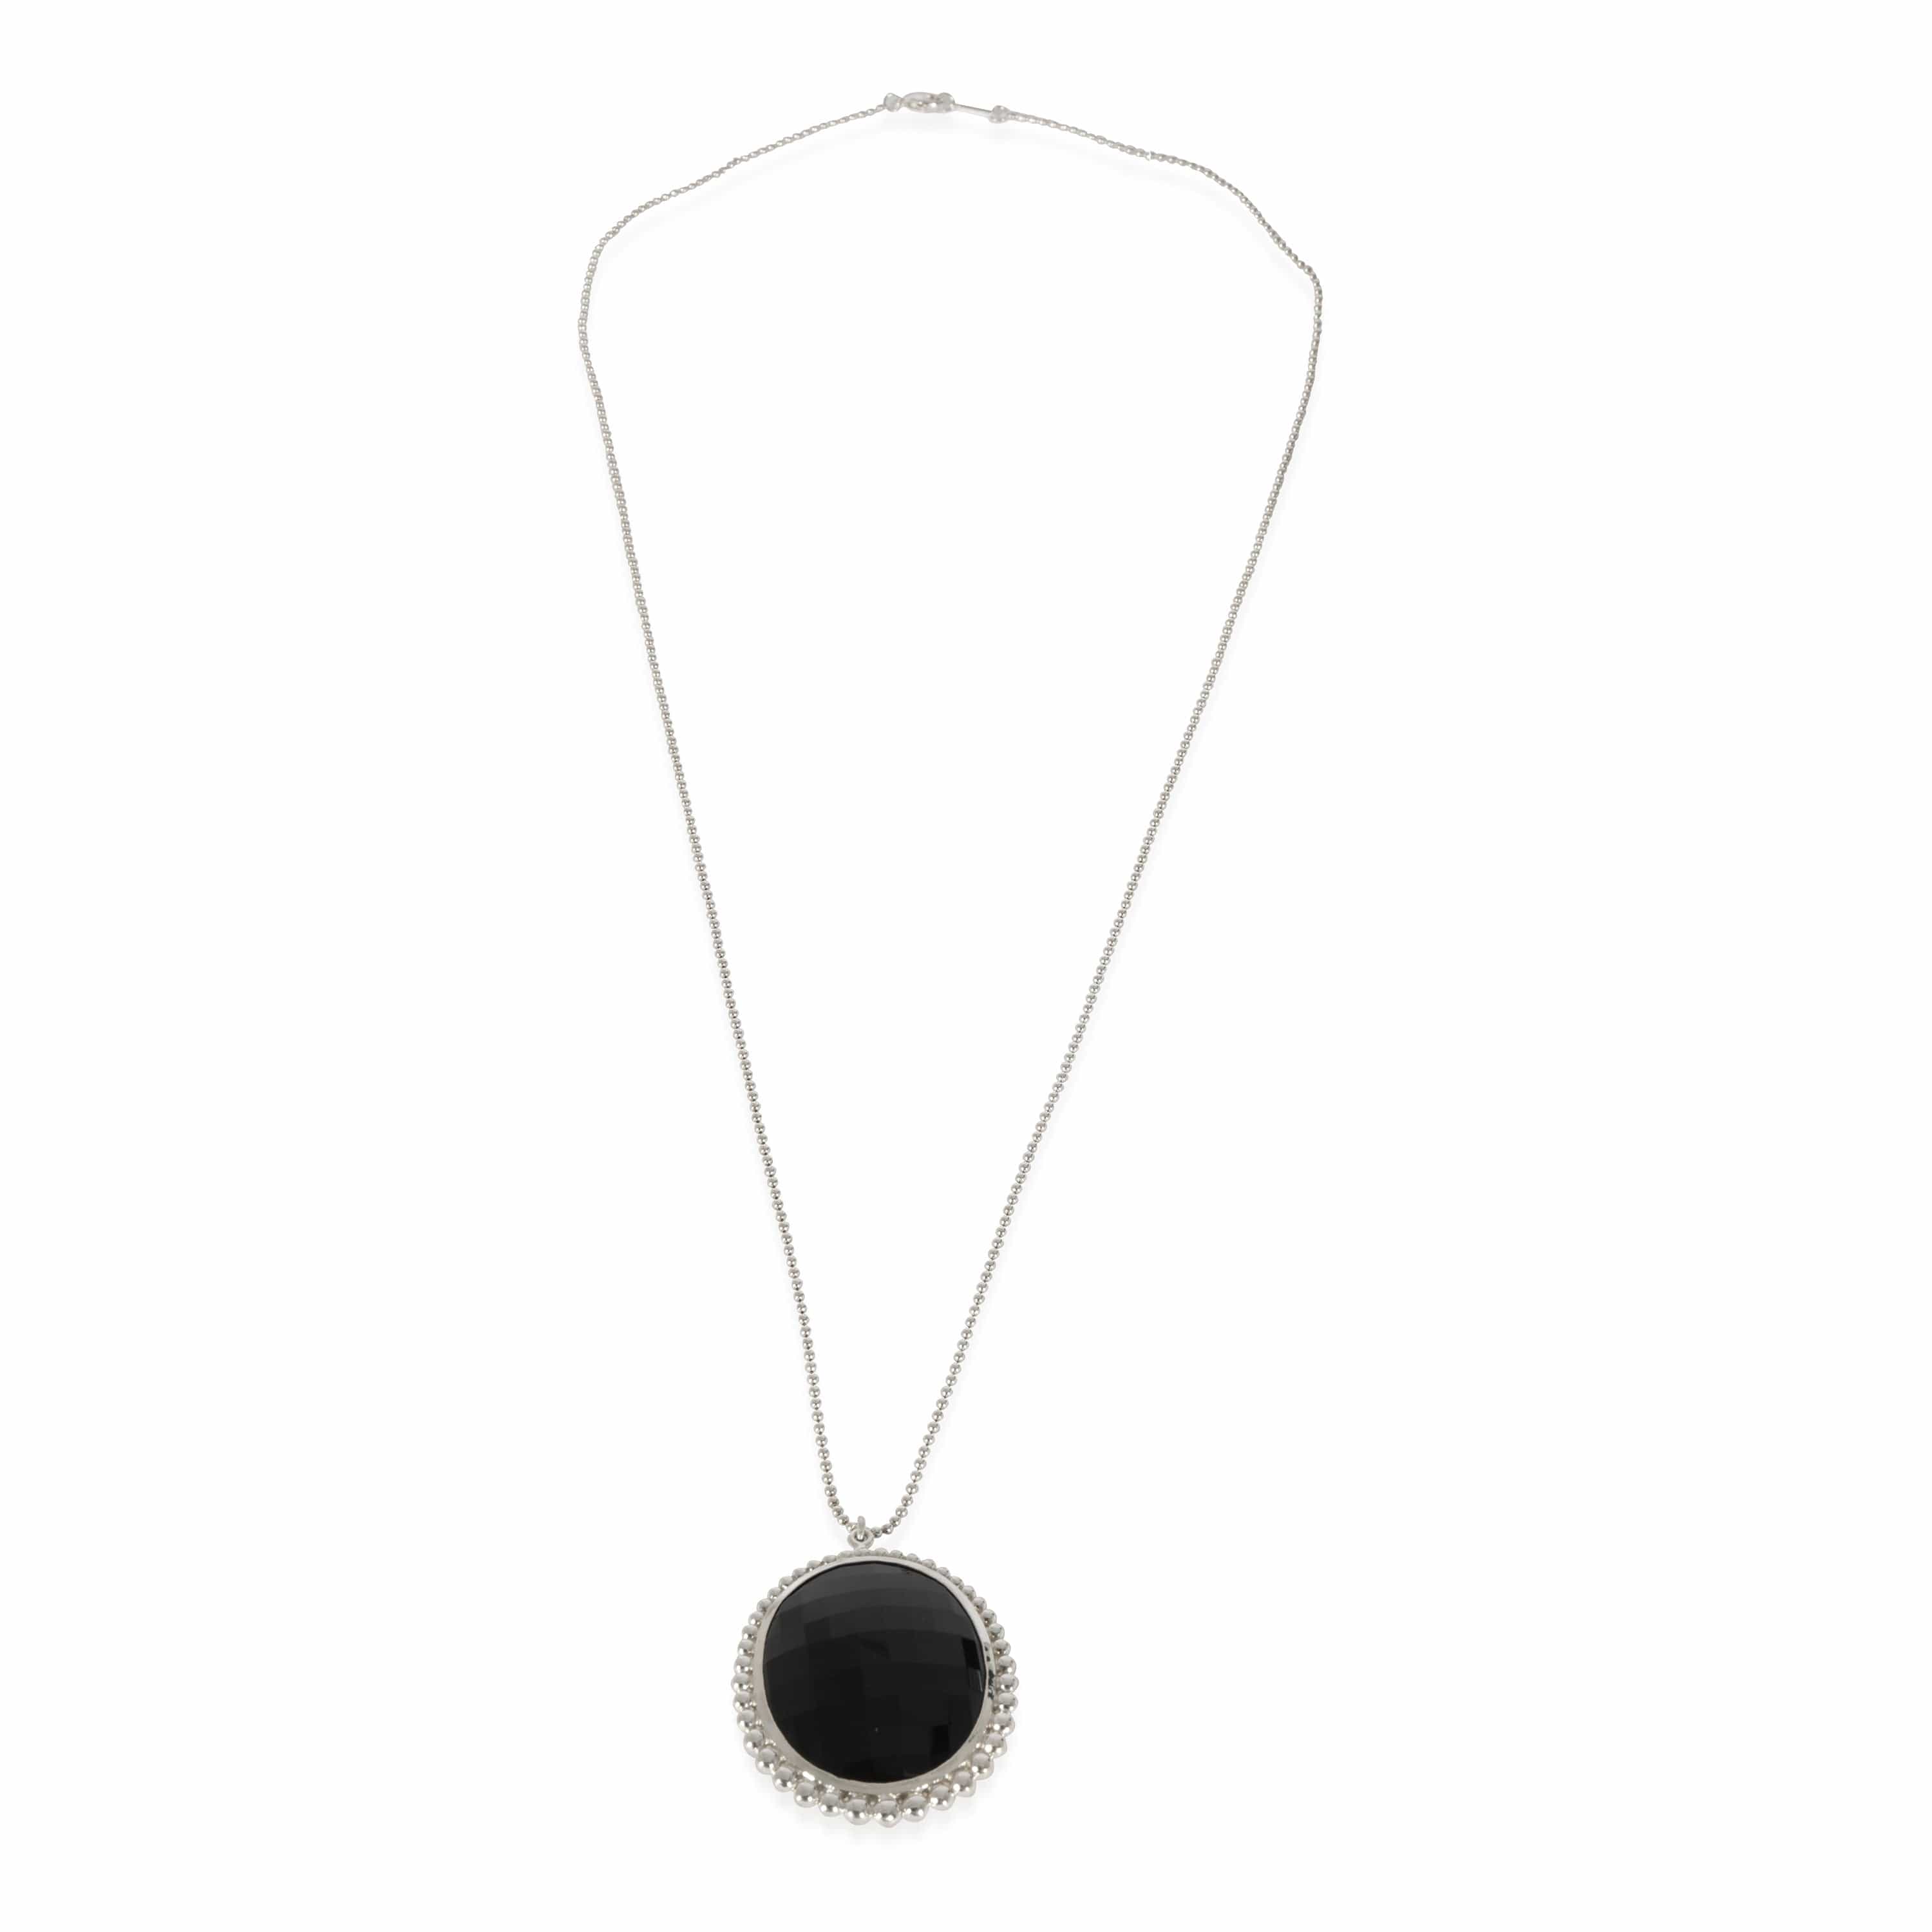 Tiffany & Co. Tiffany & Co. Onyx Necklace in  Sterling Silver Black